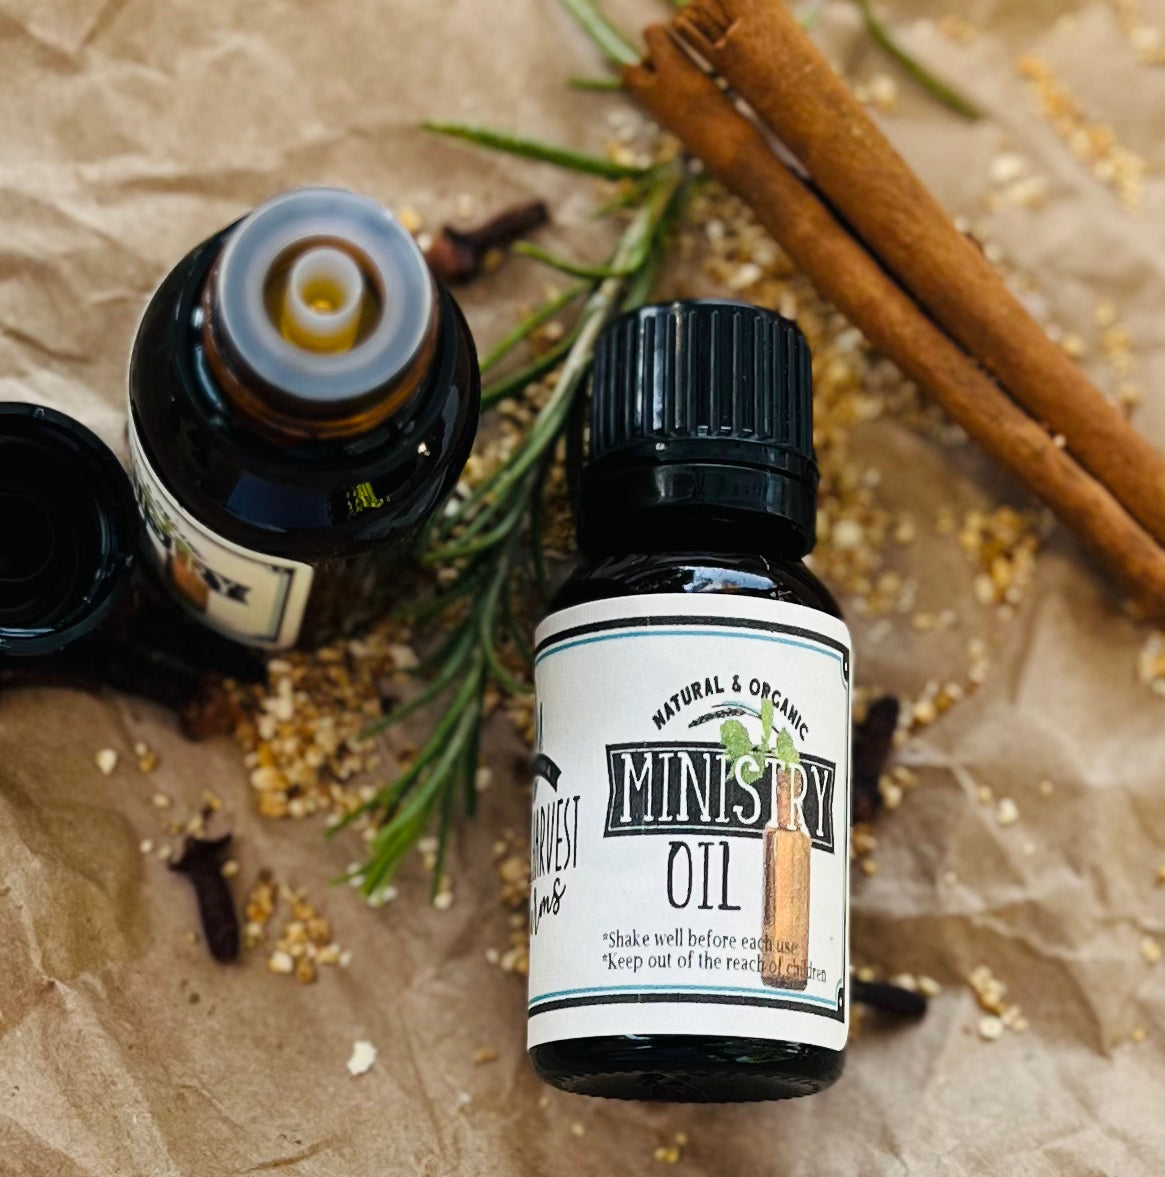 Our Ministry Oil is our reformulation of Thieves Oil. Sweet Harvest Farms Thieves oil is uncut and has an amazing aroma! Better than Thieves oil our formulation using organic oil can stop the norovirus in its tracts!